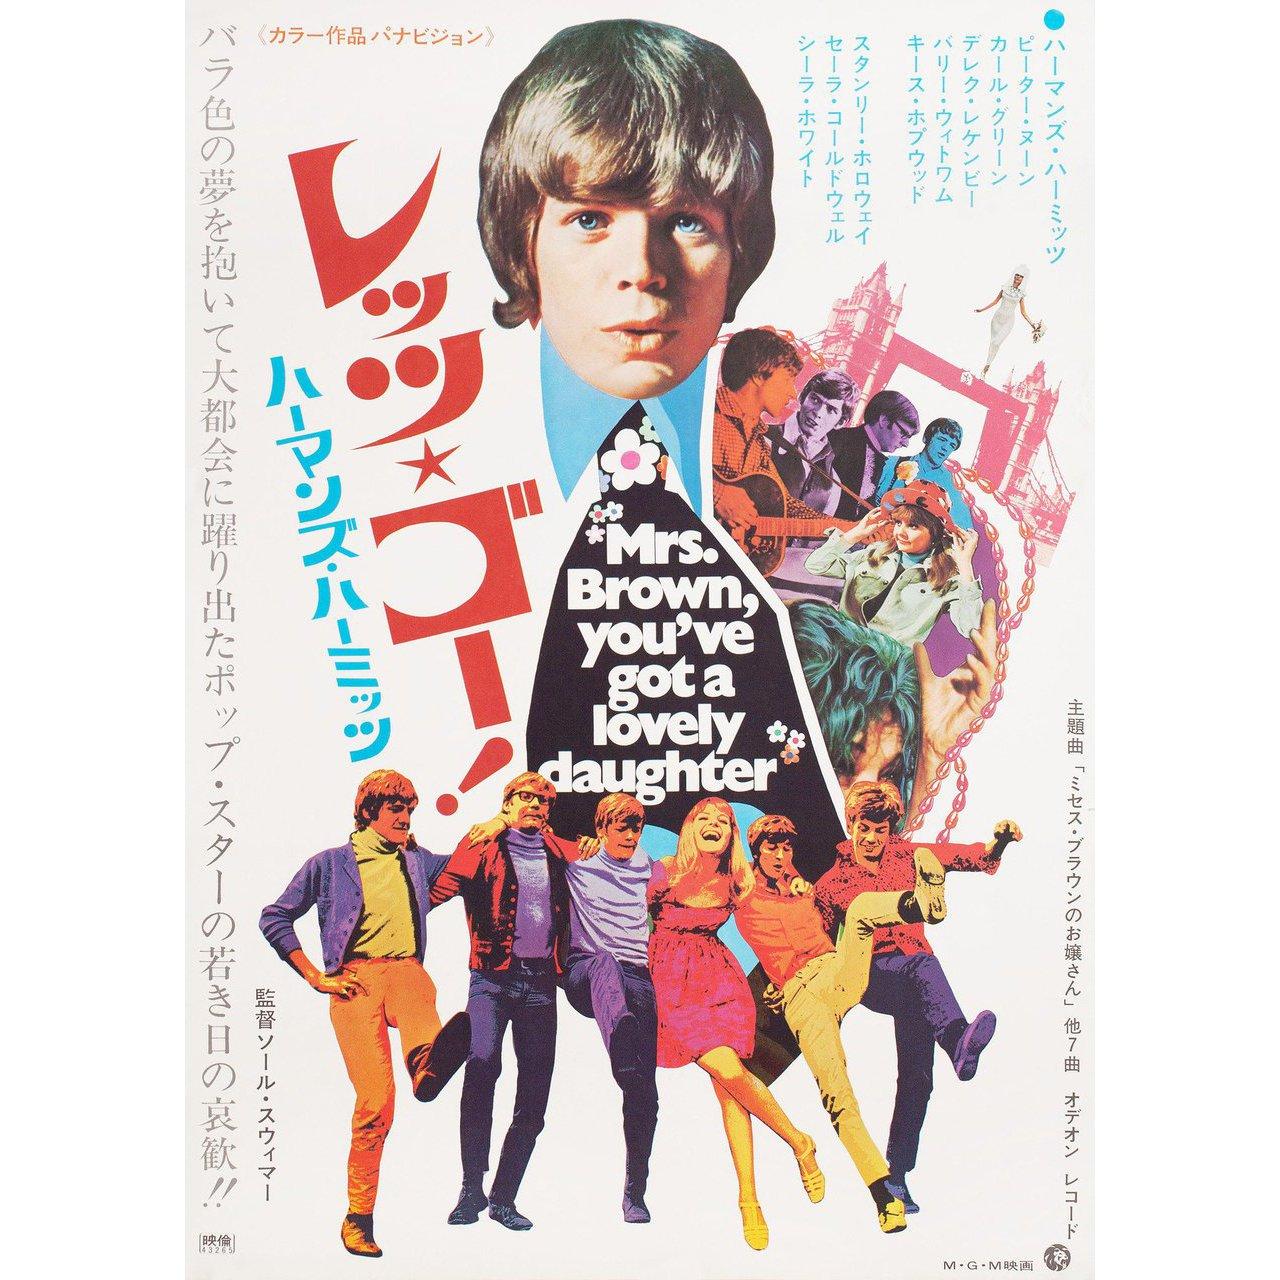 Original 1968 Japanese B2 poster for the film Mrs. Brown, You've Got a Lovely Daughter directed by Saul Swimmer with Peter Noone / Karl Green / Keith Hopwood / Derek Leckenby. Fine condition, rolled. Please note: the size is stated in inches and the